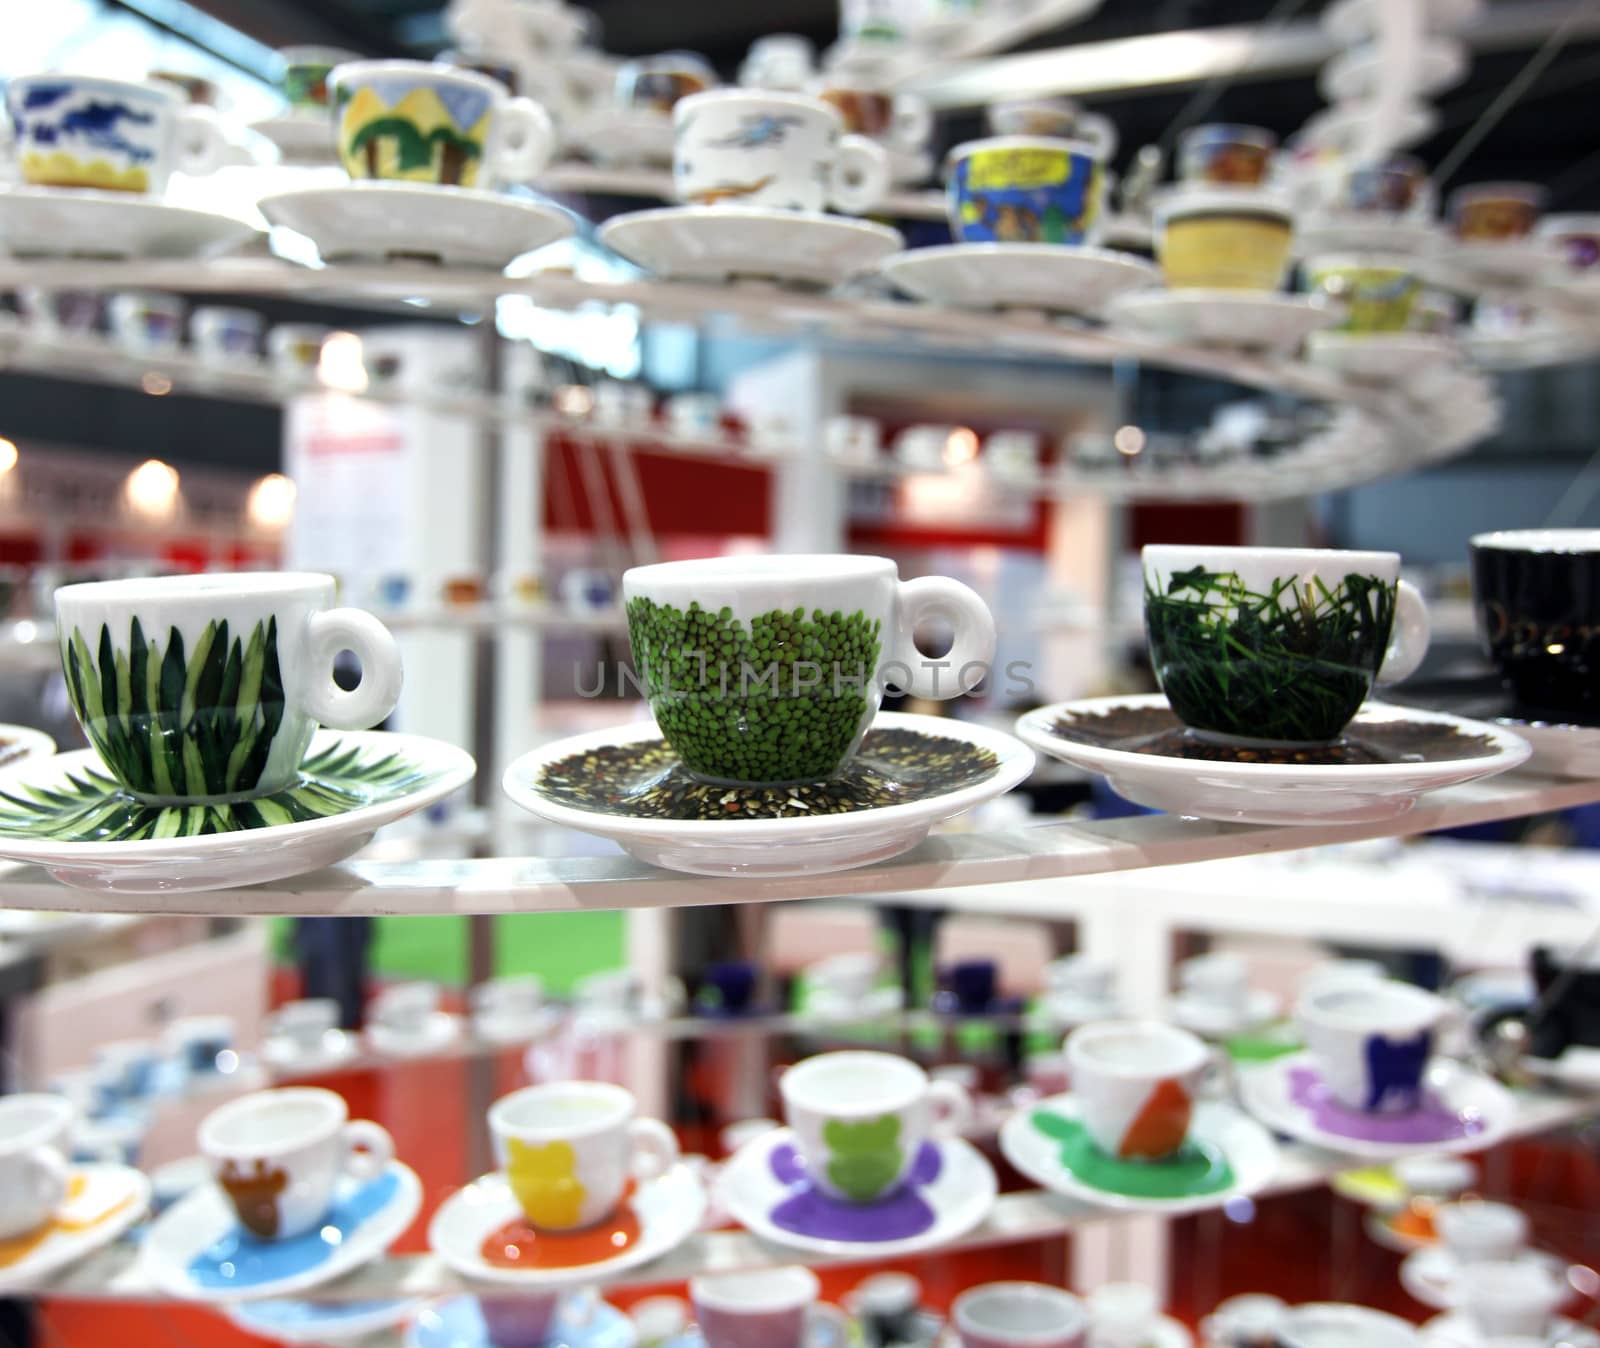 Illy Caffè coffee cups installation in exhibition at Tuttofood, Milano World Food Exhibition